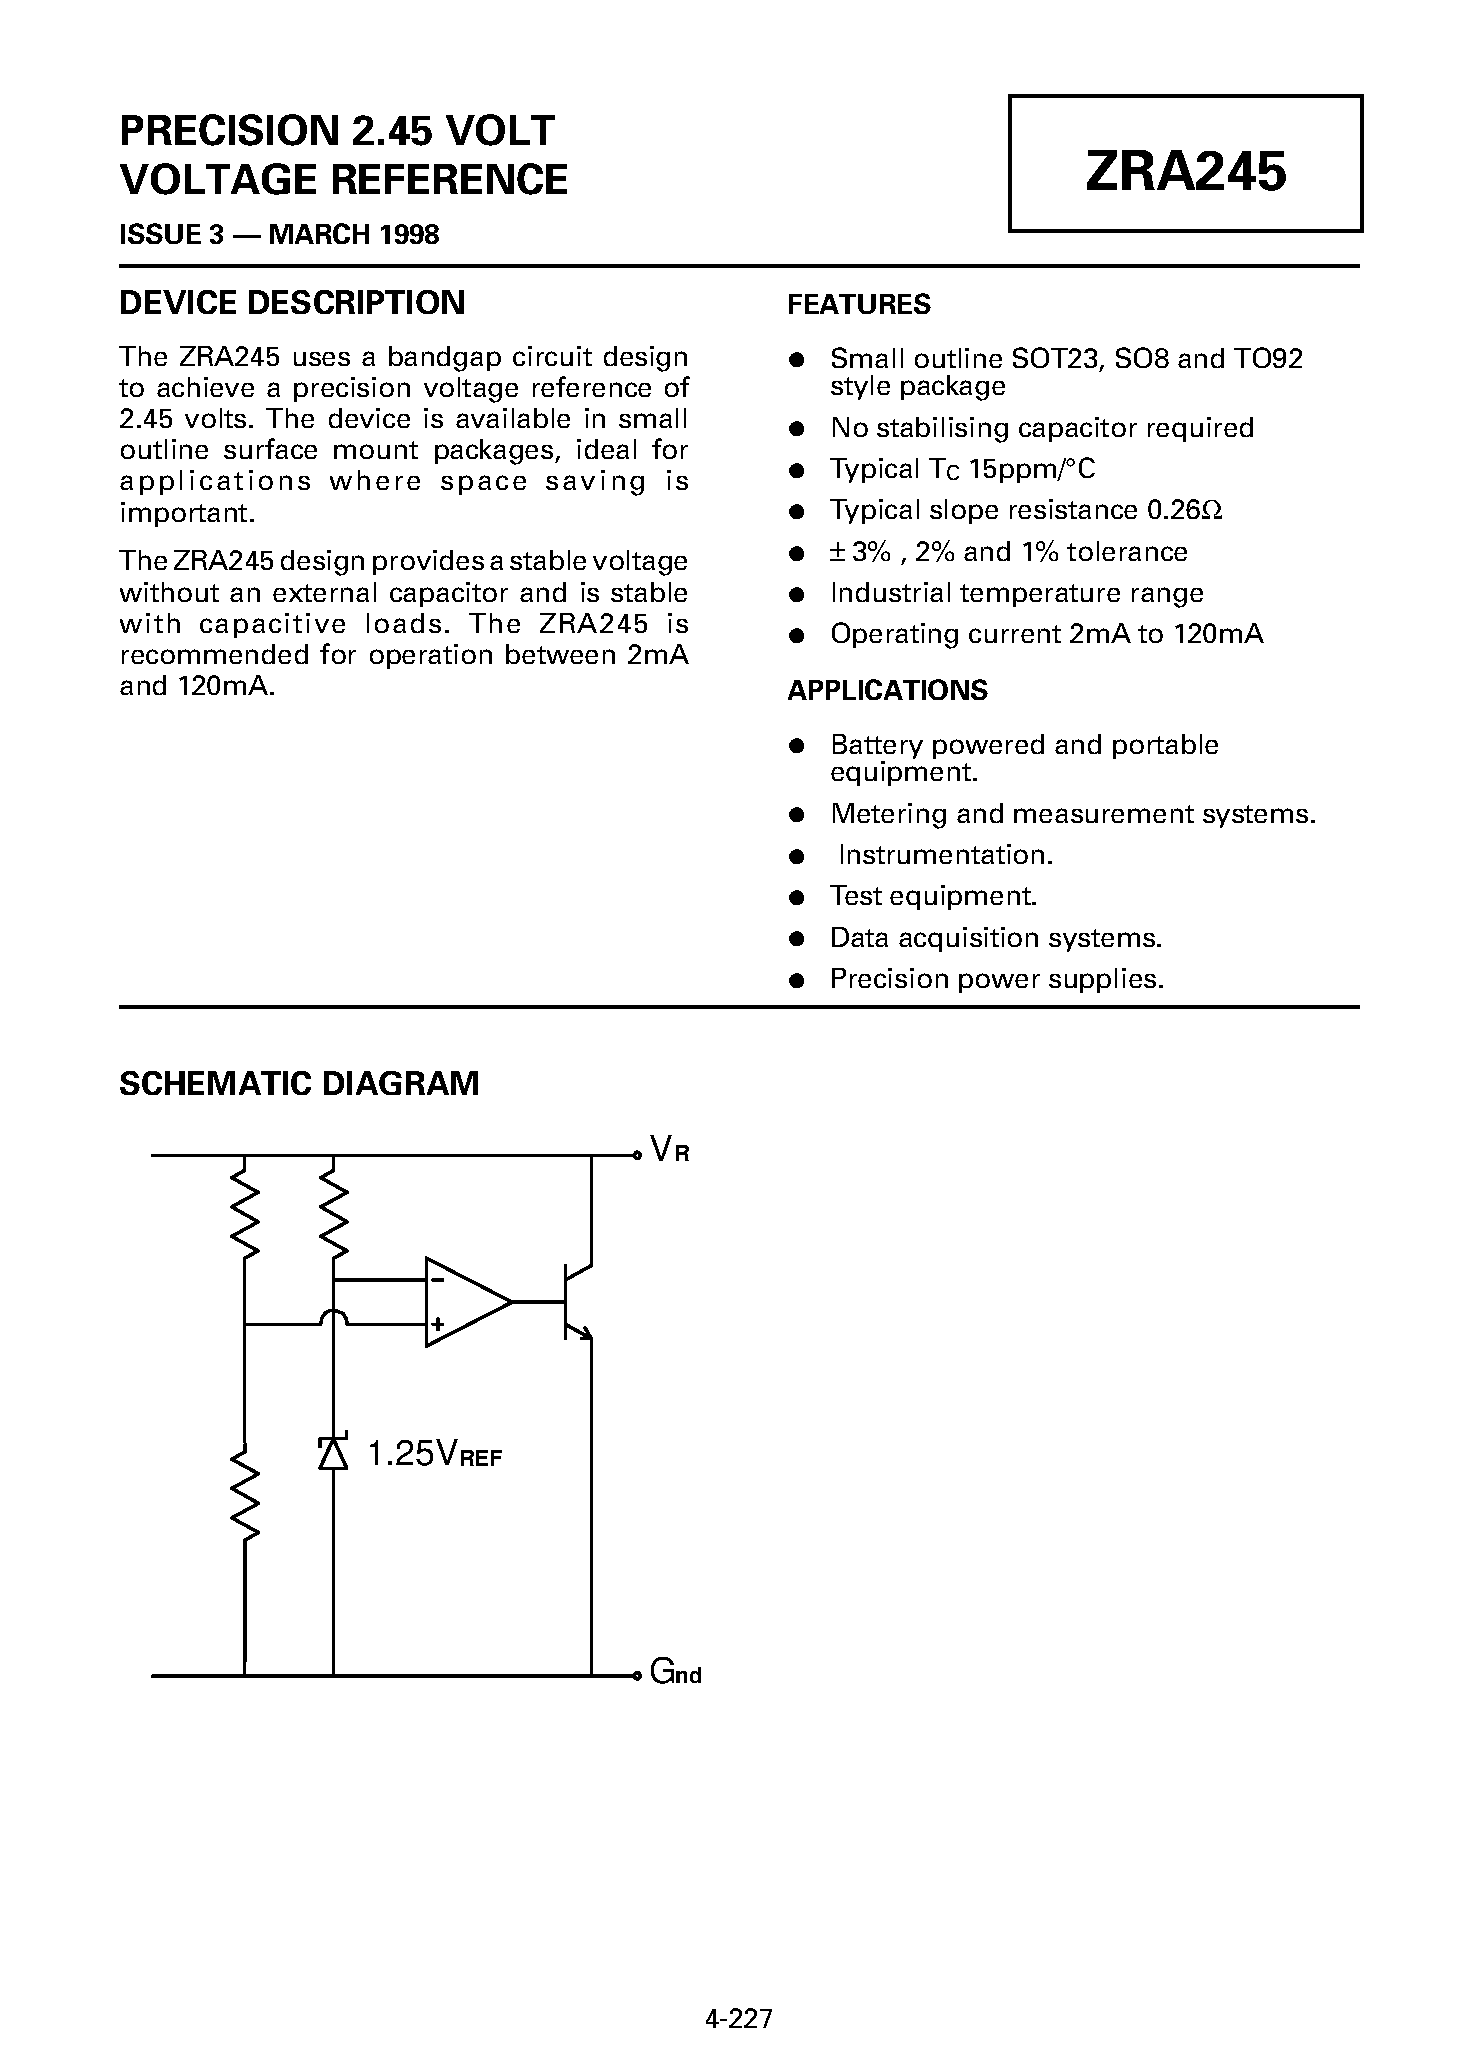 Datasheet ZRA245F01 - PRECISION 2.45 VOLT VOLTAGE REFERENCE page 1